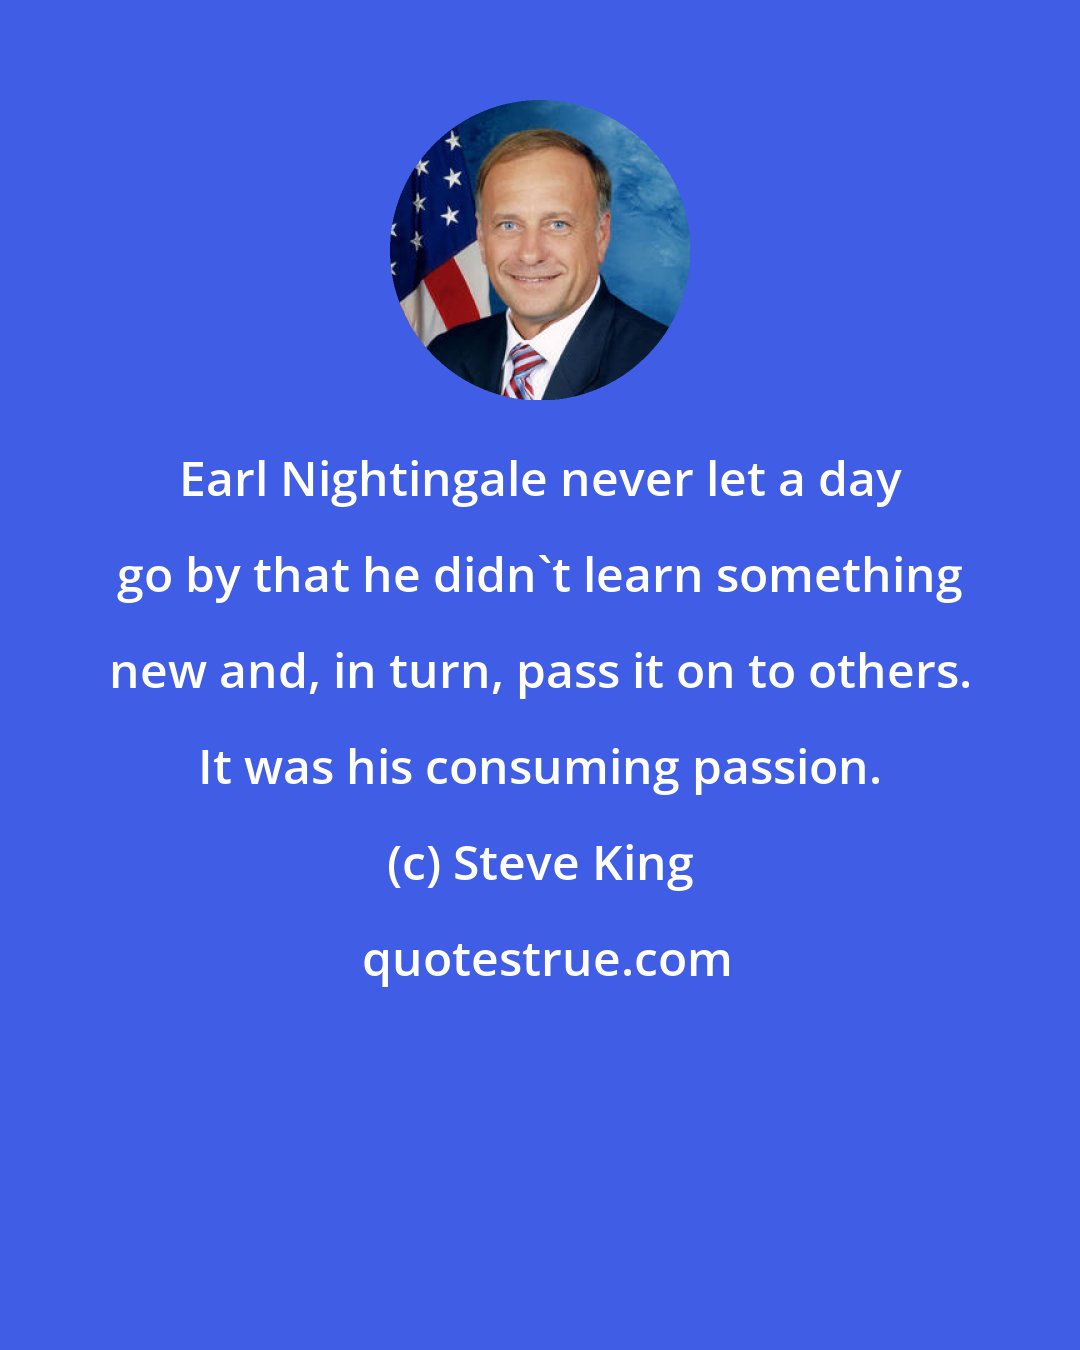 Steve King: Earl Nightingale never let a day go by that he didn`t learn something new and, in turn, pass it on to others. It was his consuming passion.